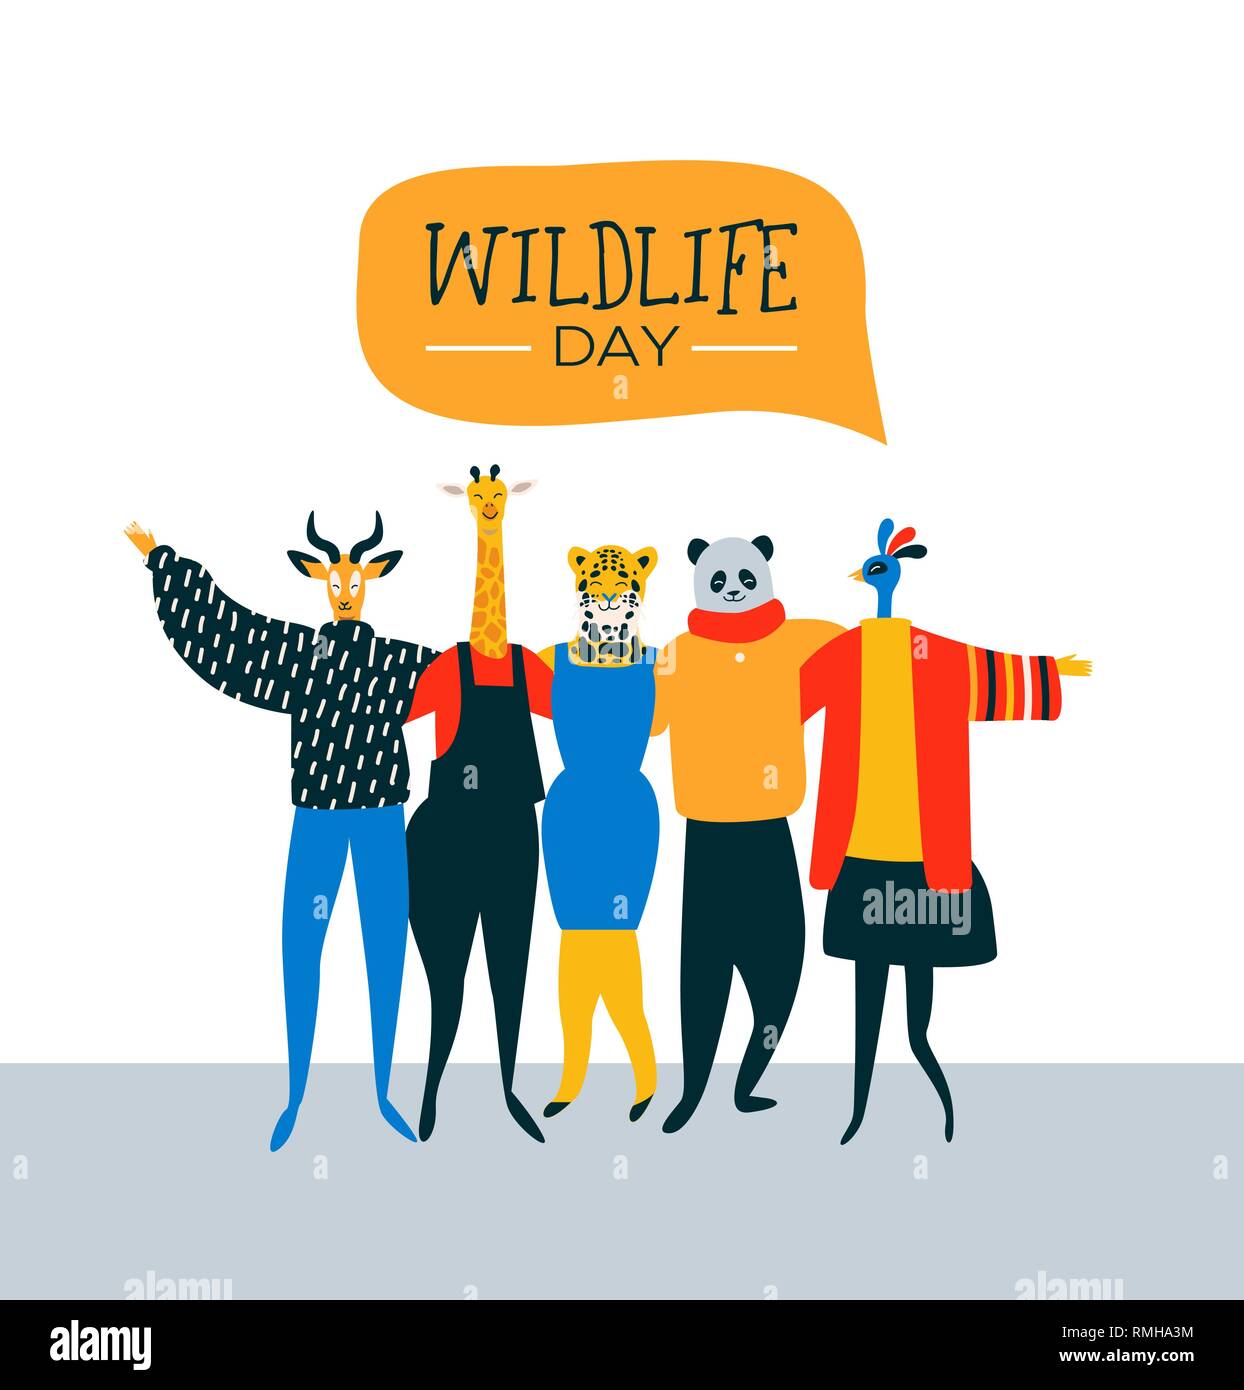 Happy wildlife day illustration with exotic animal friend group as people hugging together. Help and wild life conservation awareness concept. Stock Vector